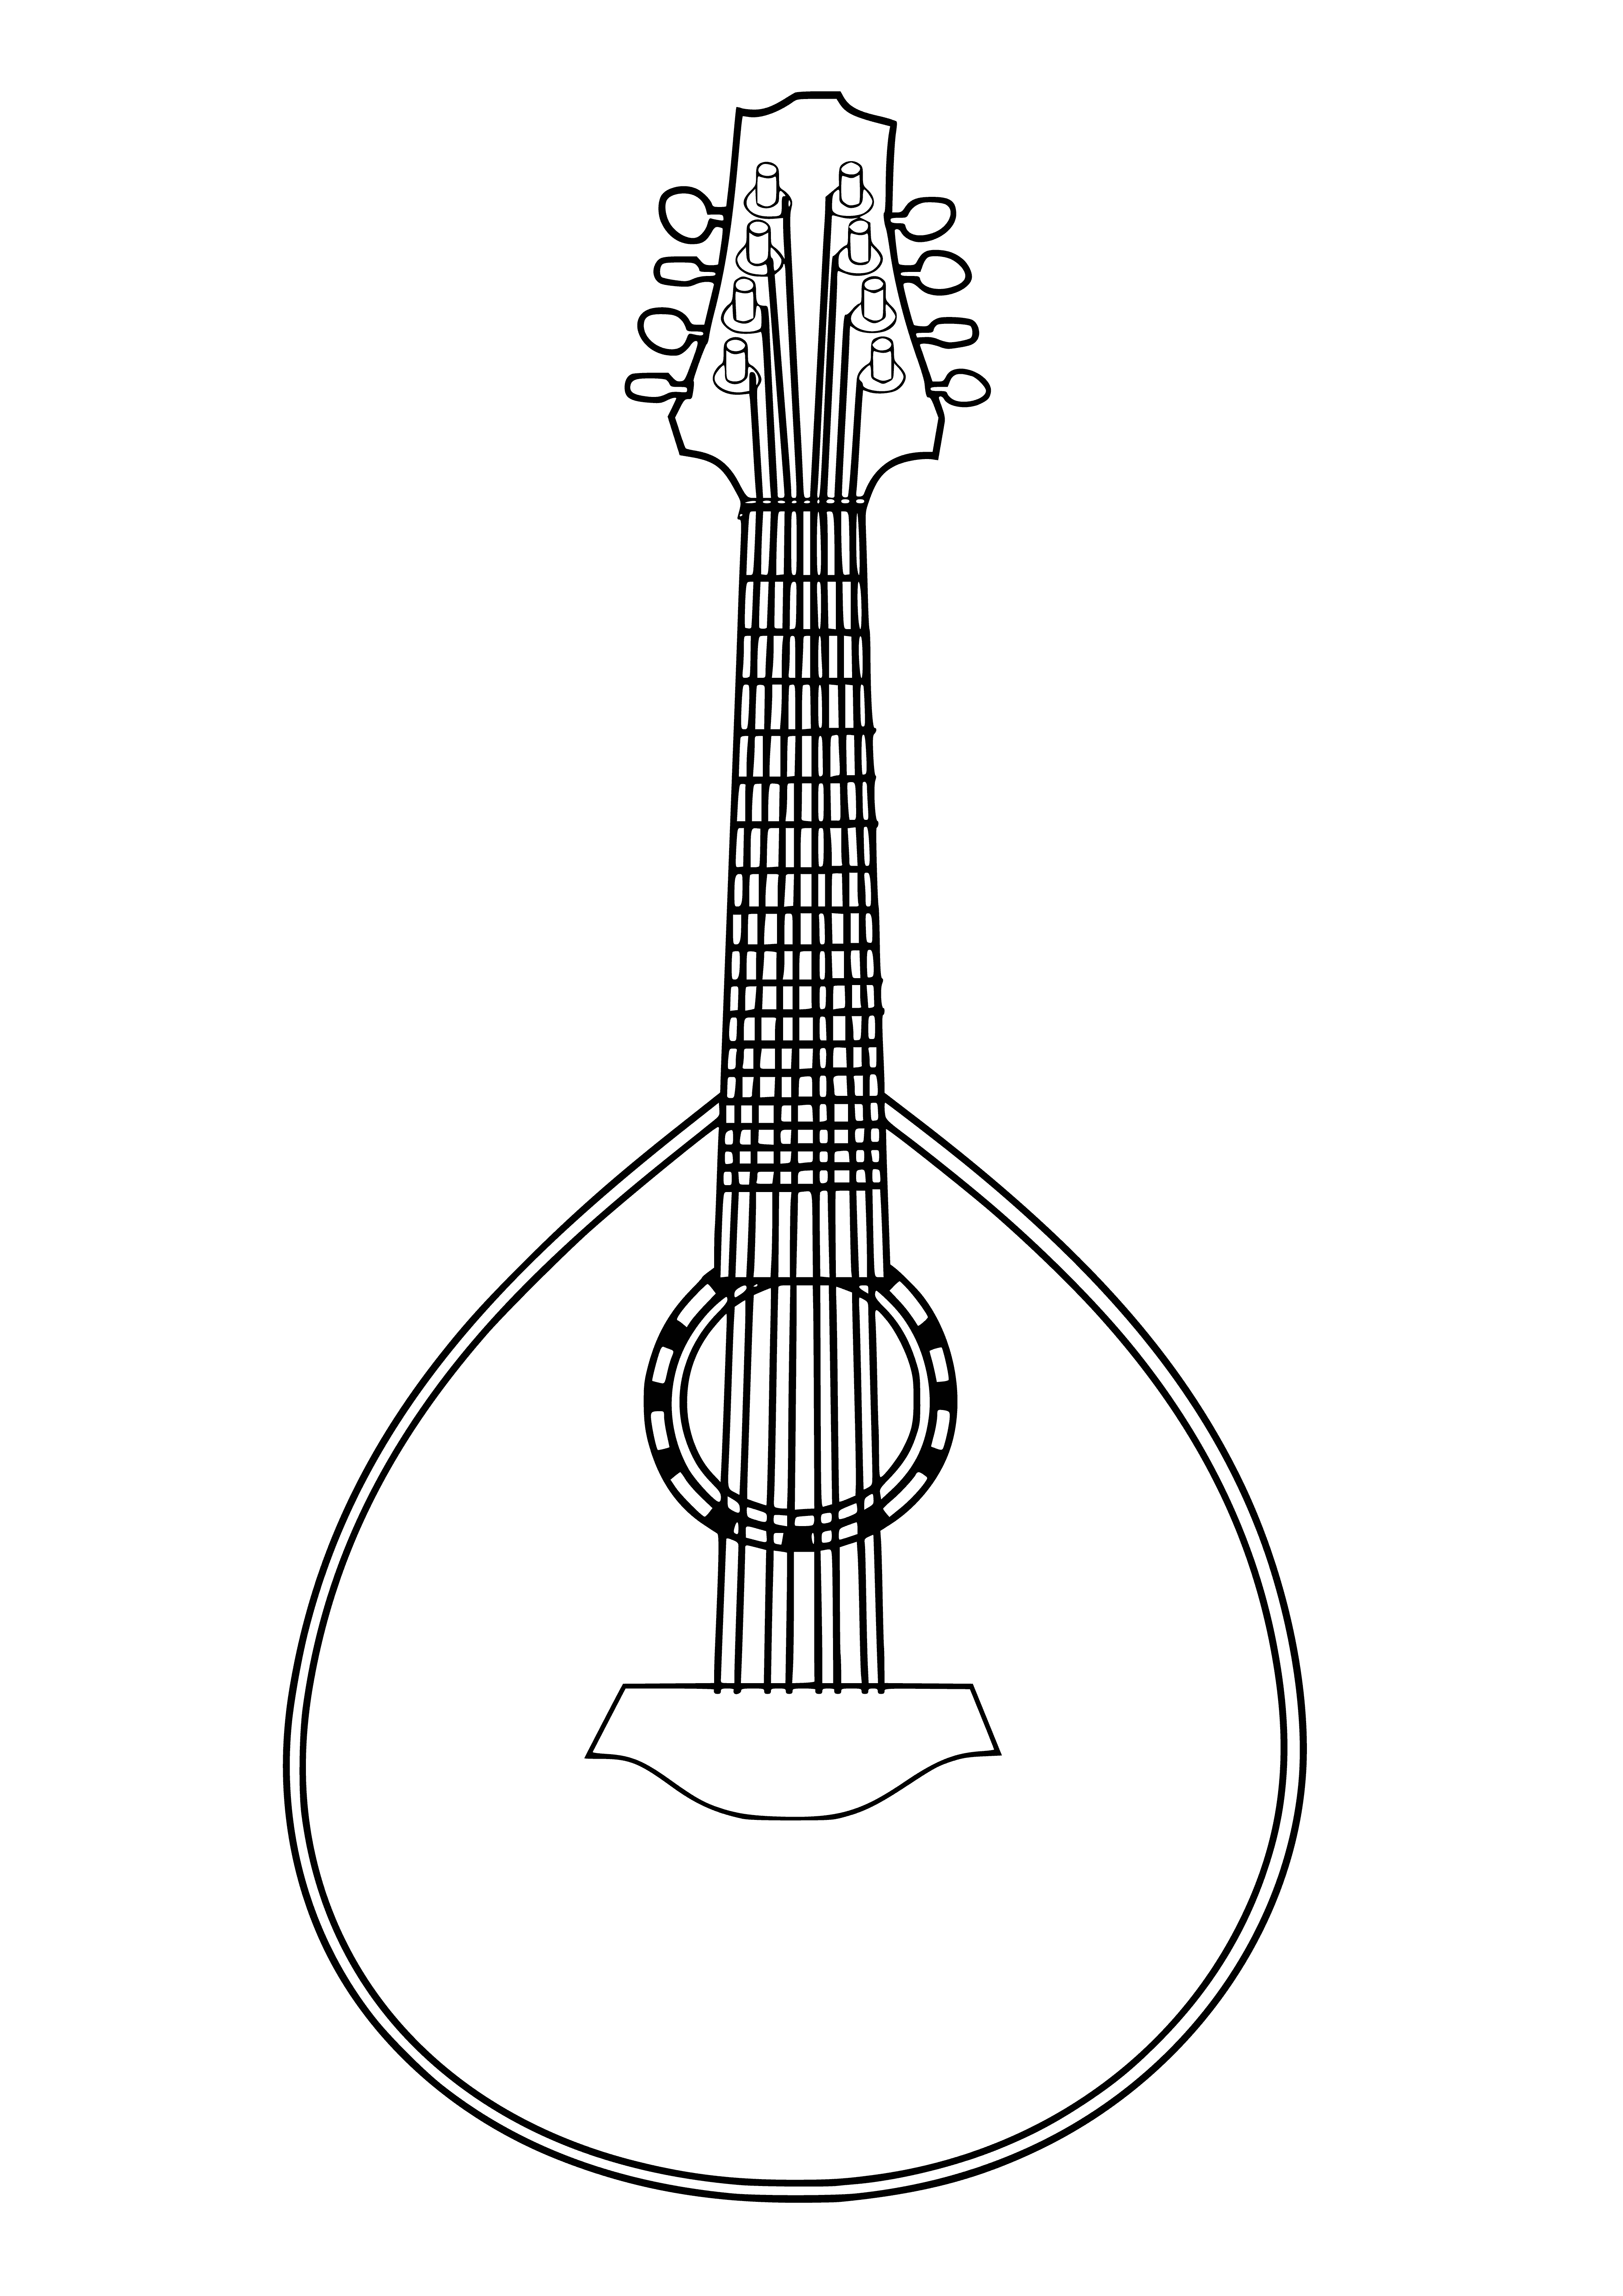 coloring page: The music - mandolin is a string instrument with a fretted neck and a teardrop-shaped body. It's used in many genres, including bluegrass, folk, and classical, and plucked with the right hand while the left adjusts pitch.